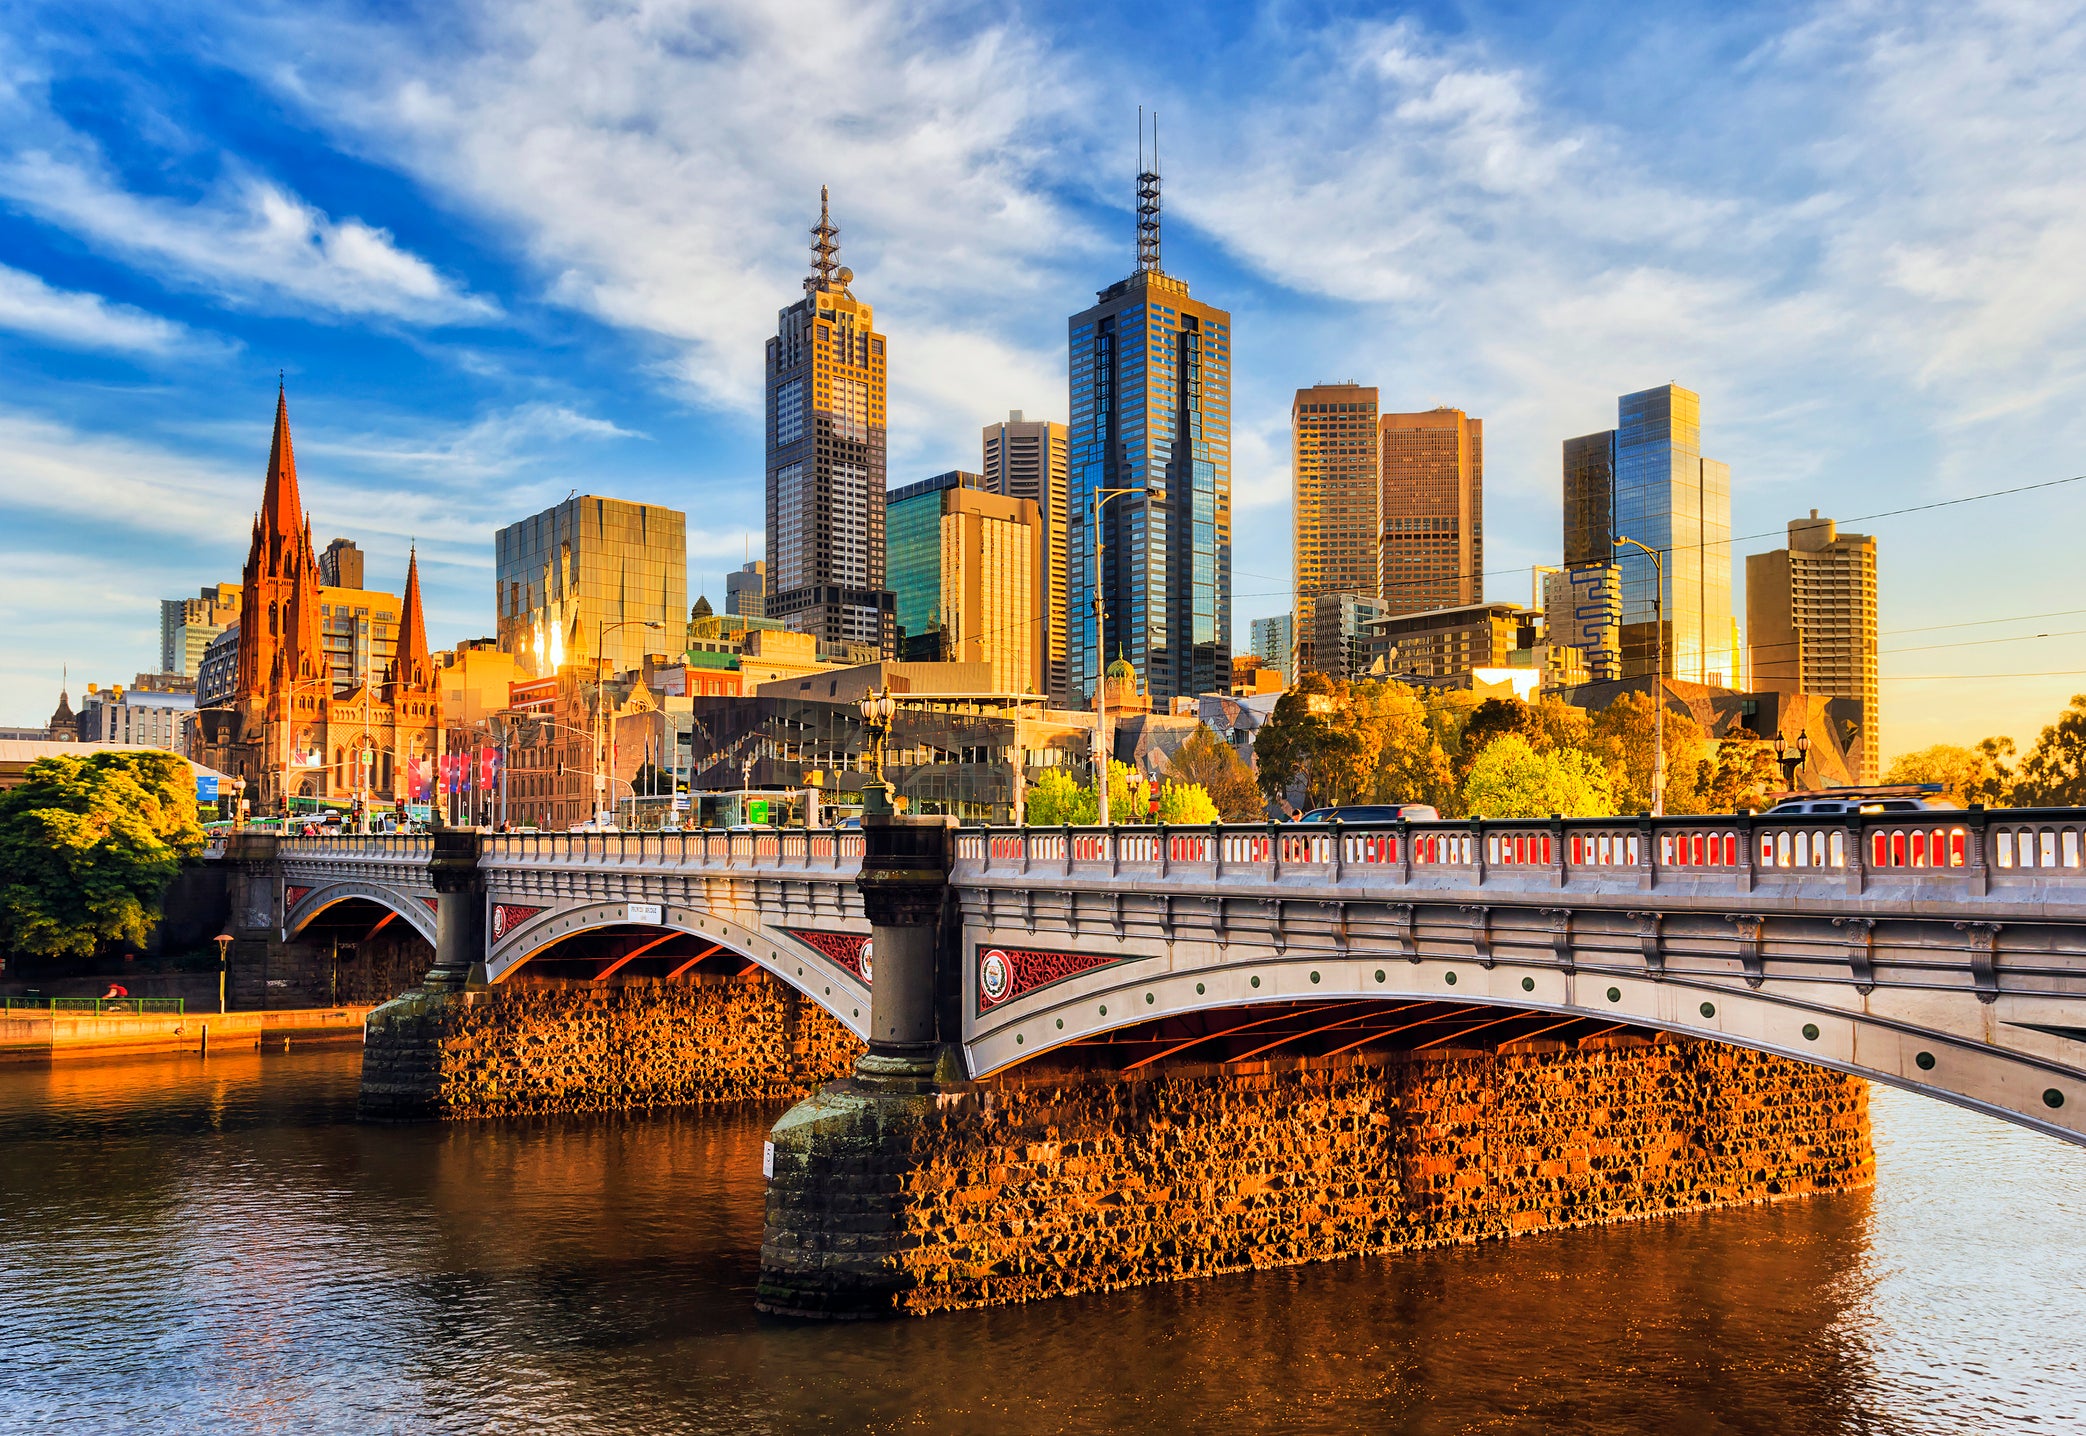 Melbourne from £675 return with Singapore Airlines (Getty/iStock)